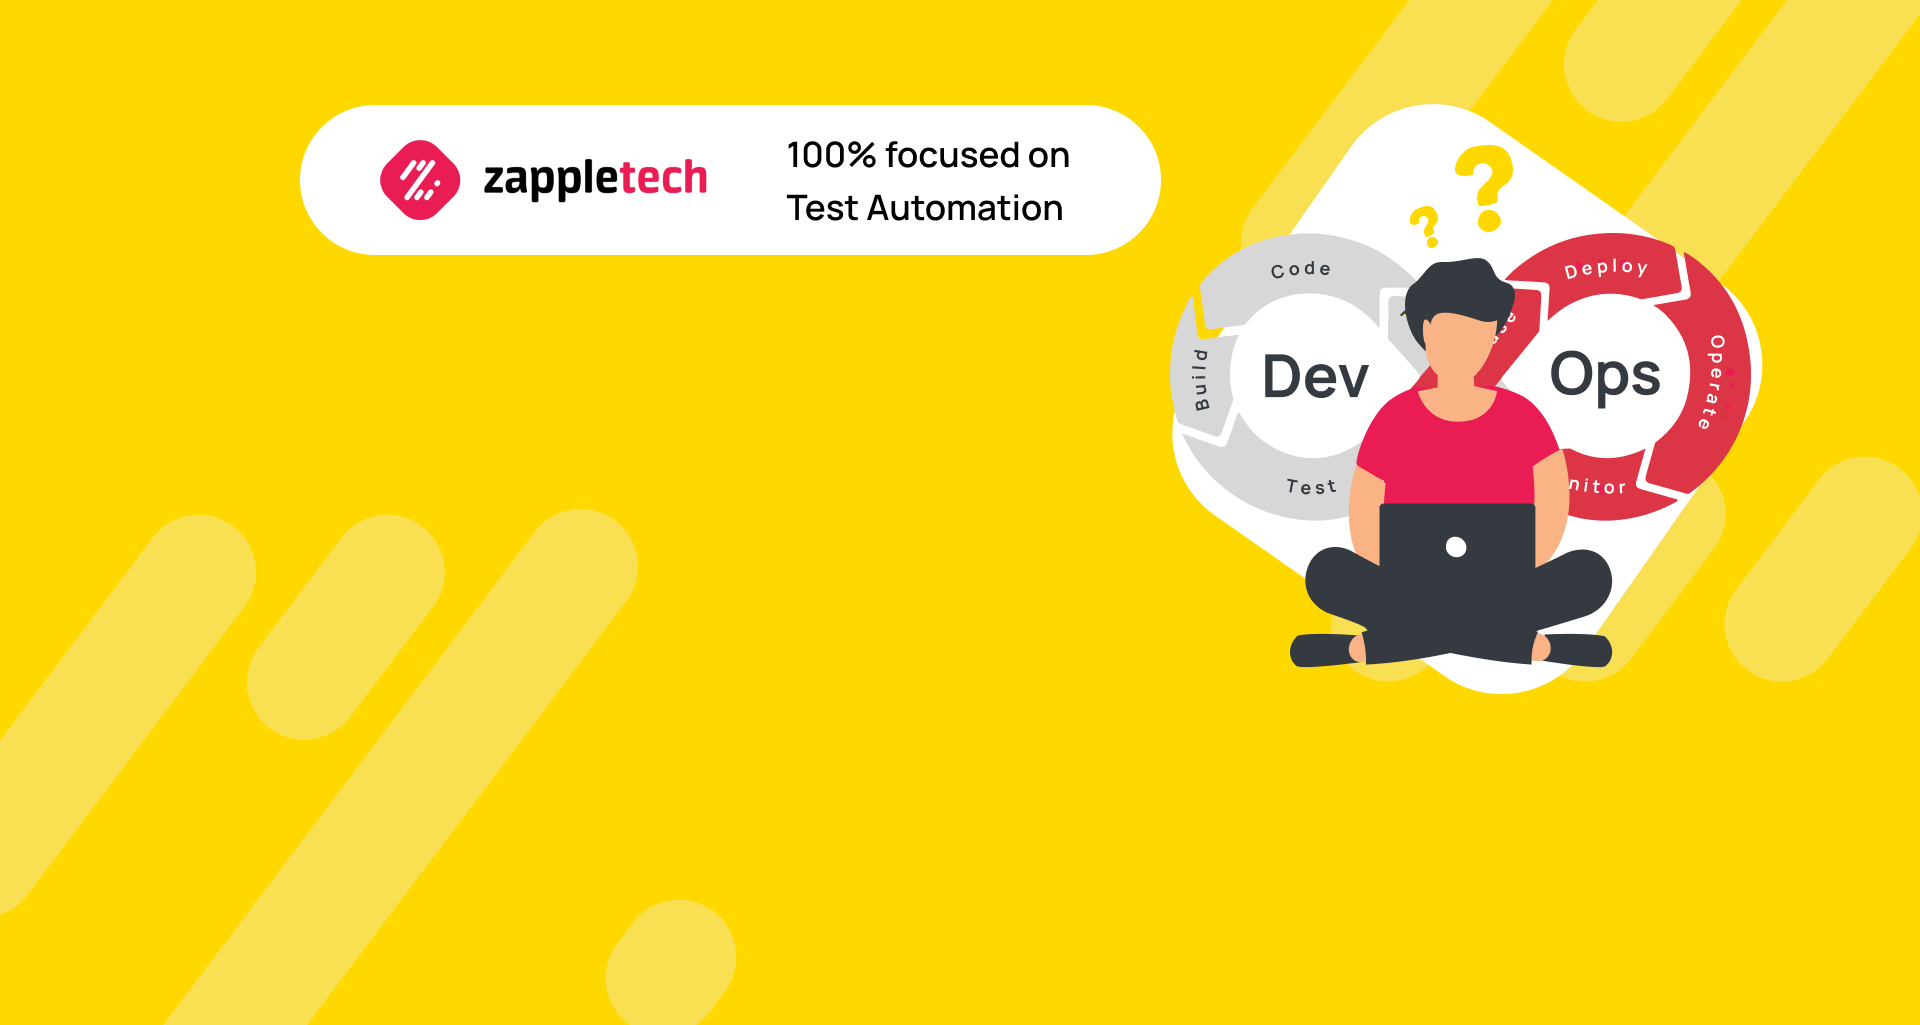 How To Use Continuous Testing In Devops?